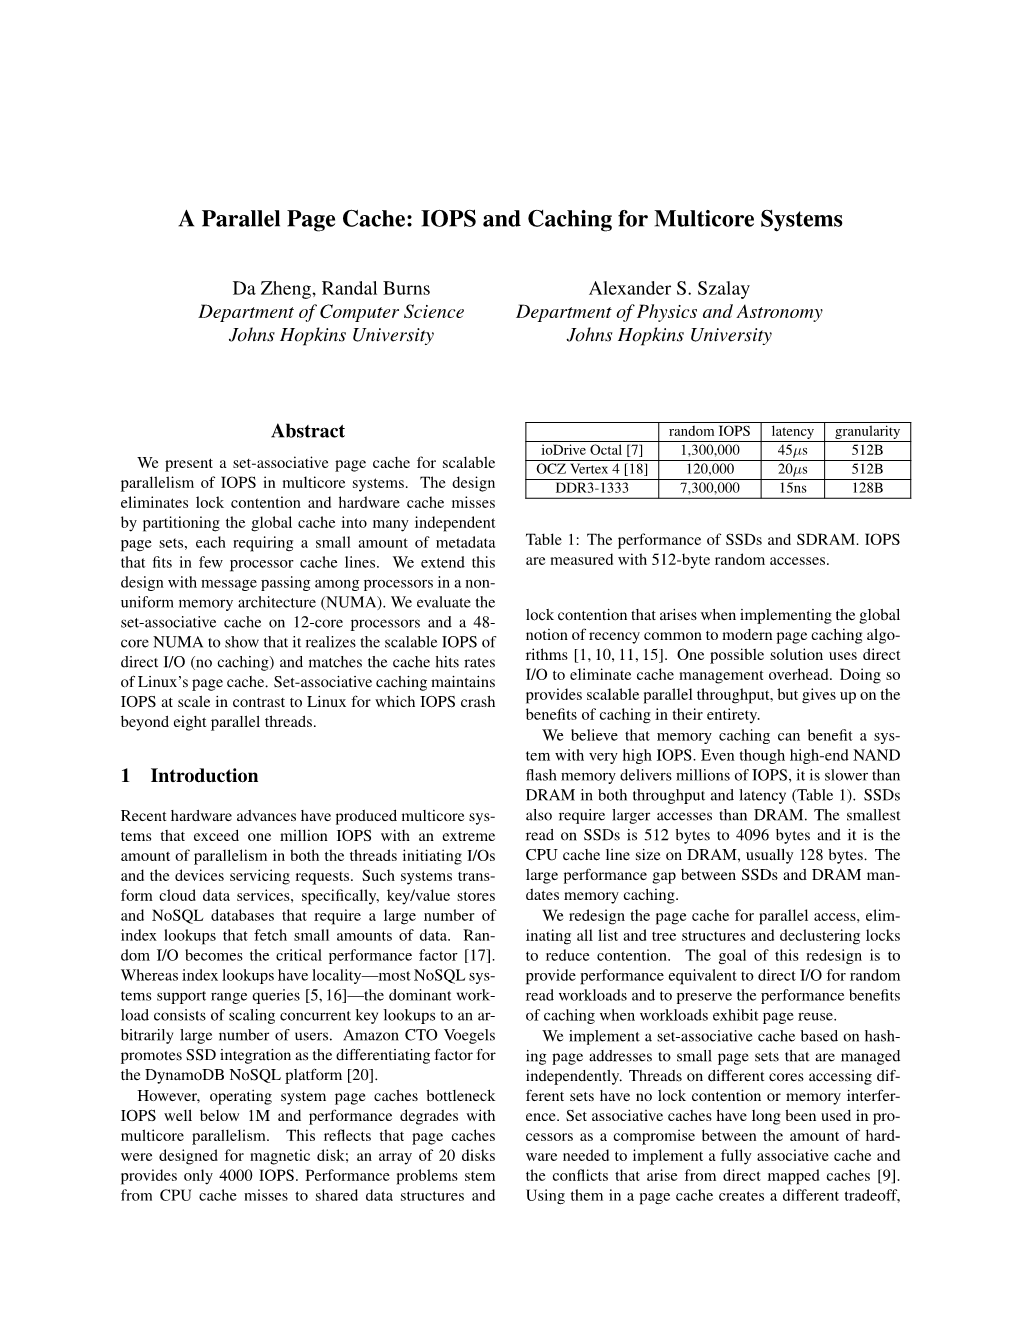 A Parallel Page Cache: IOPS and Caching for Multicore Systems